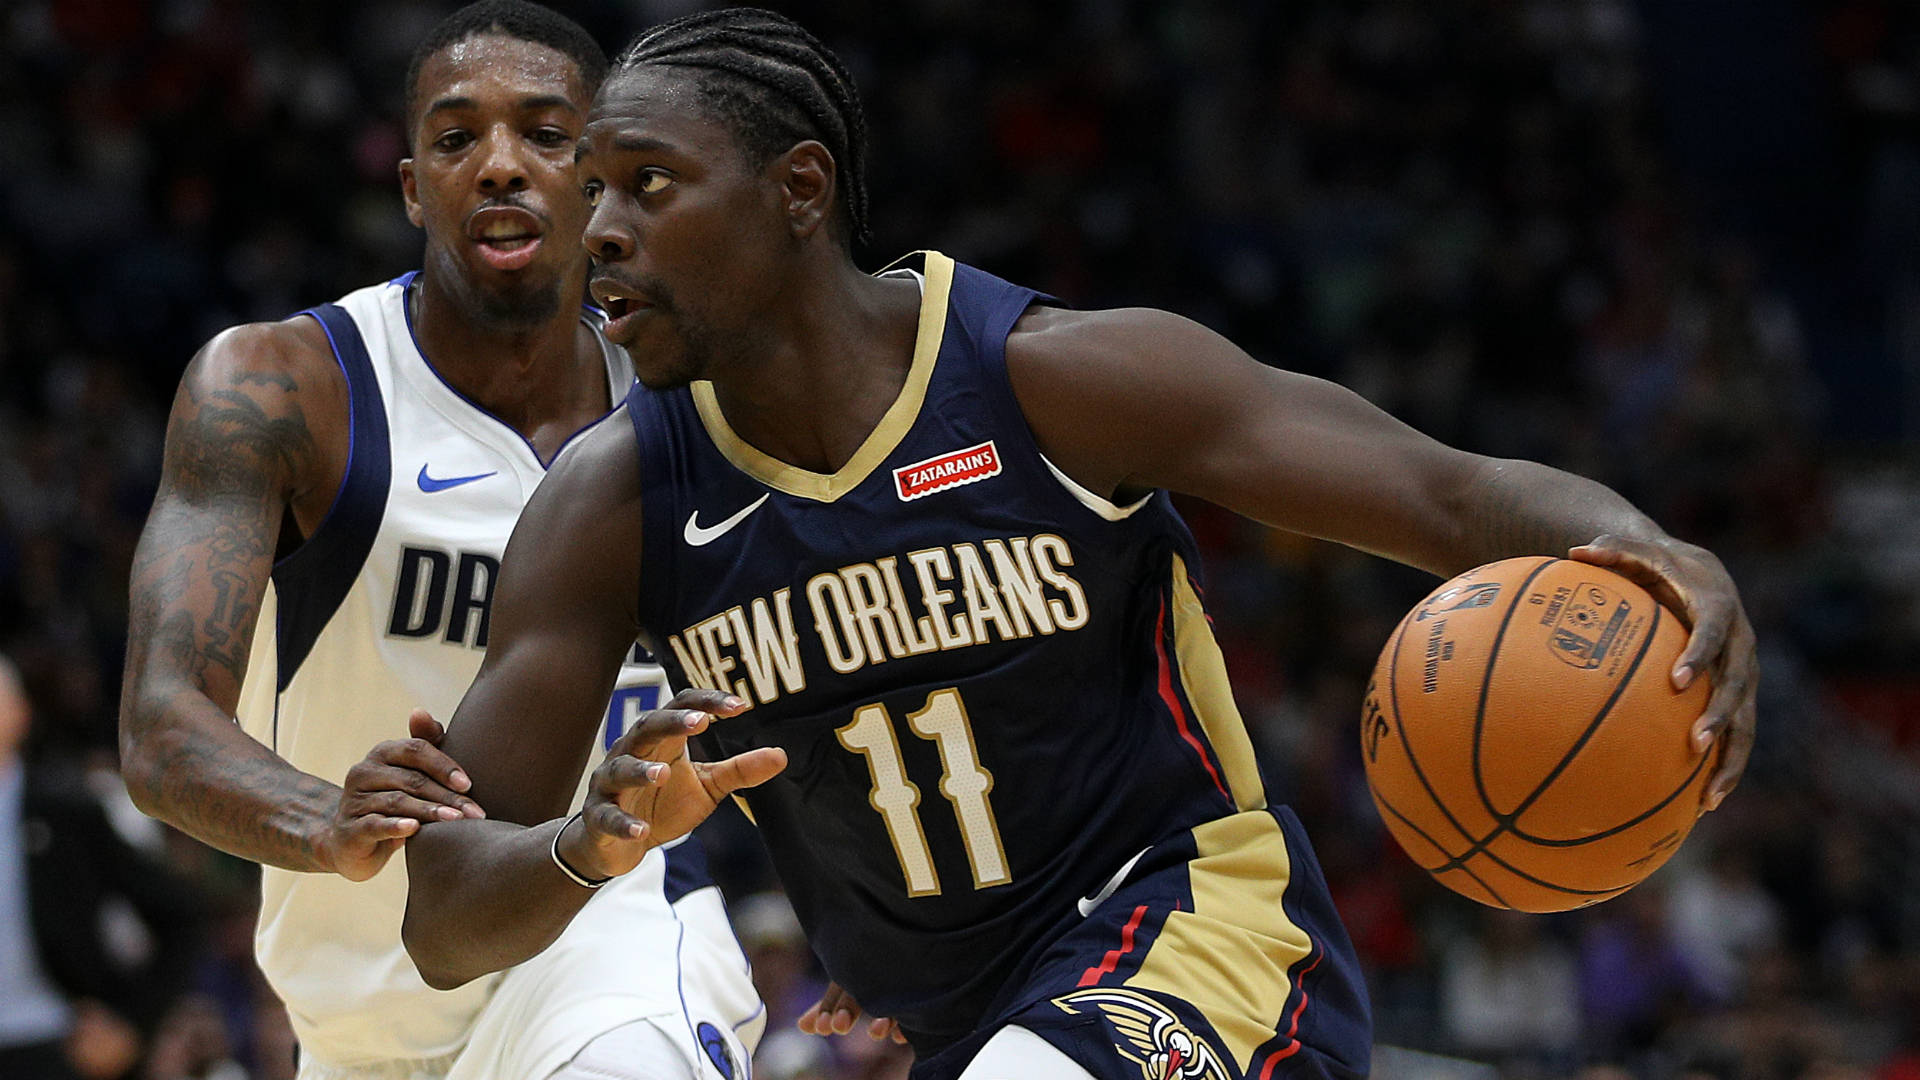 Iconic Nba Player, Jrue Holiday In Action